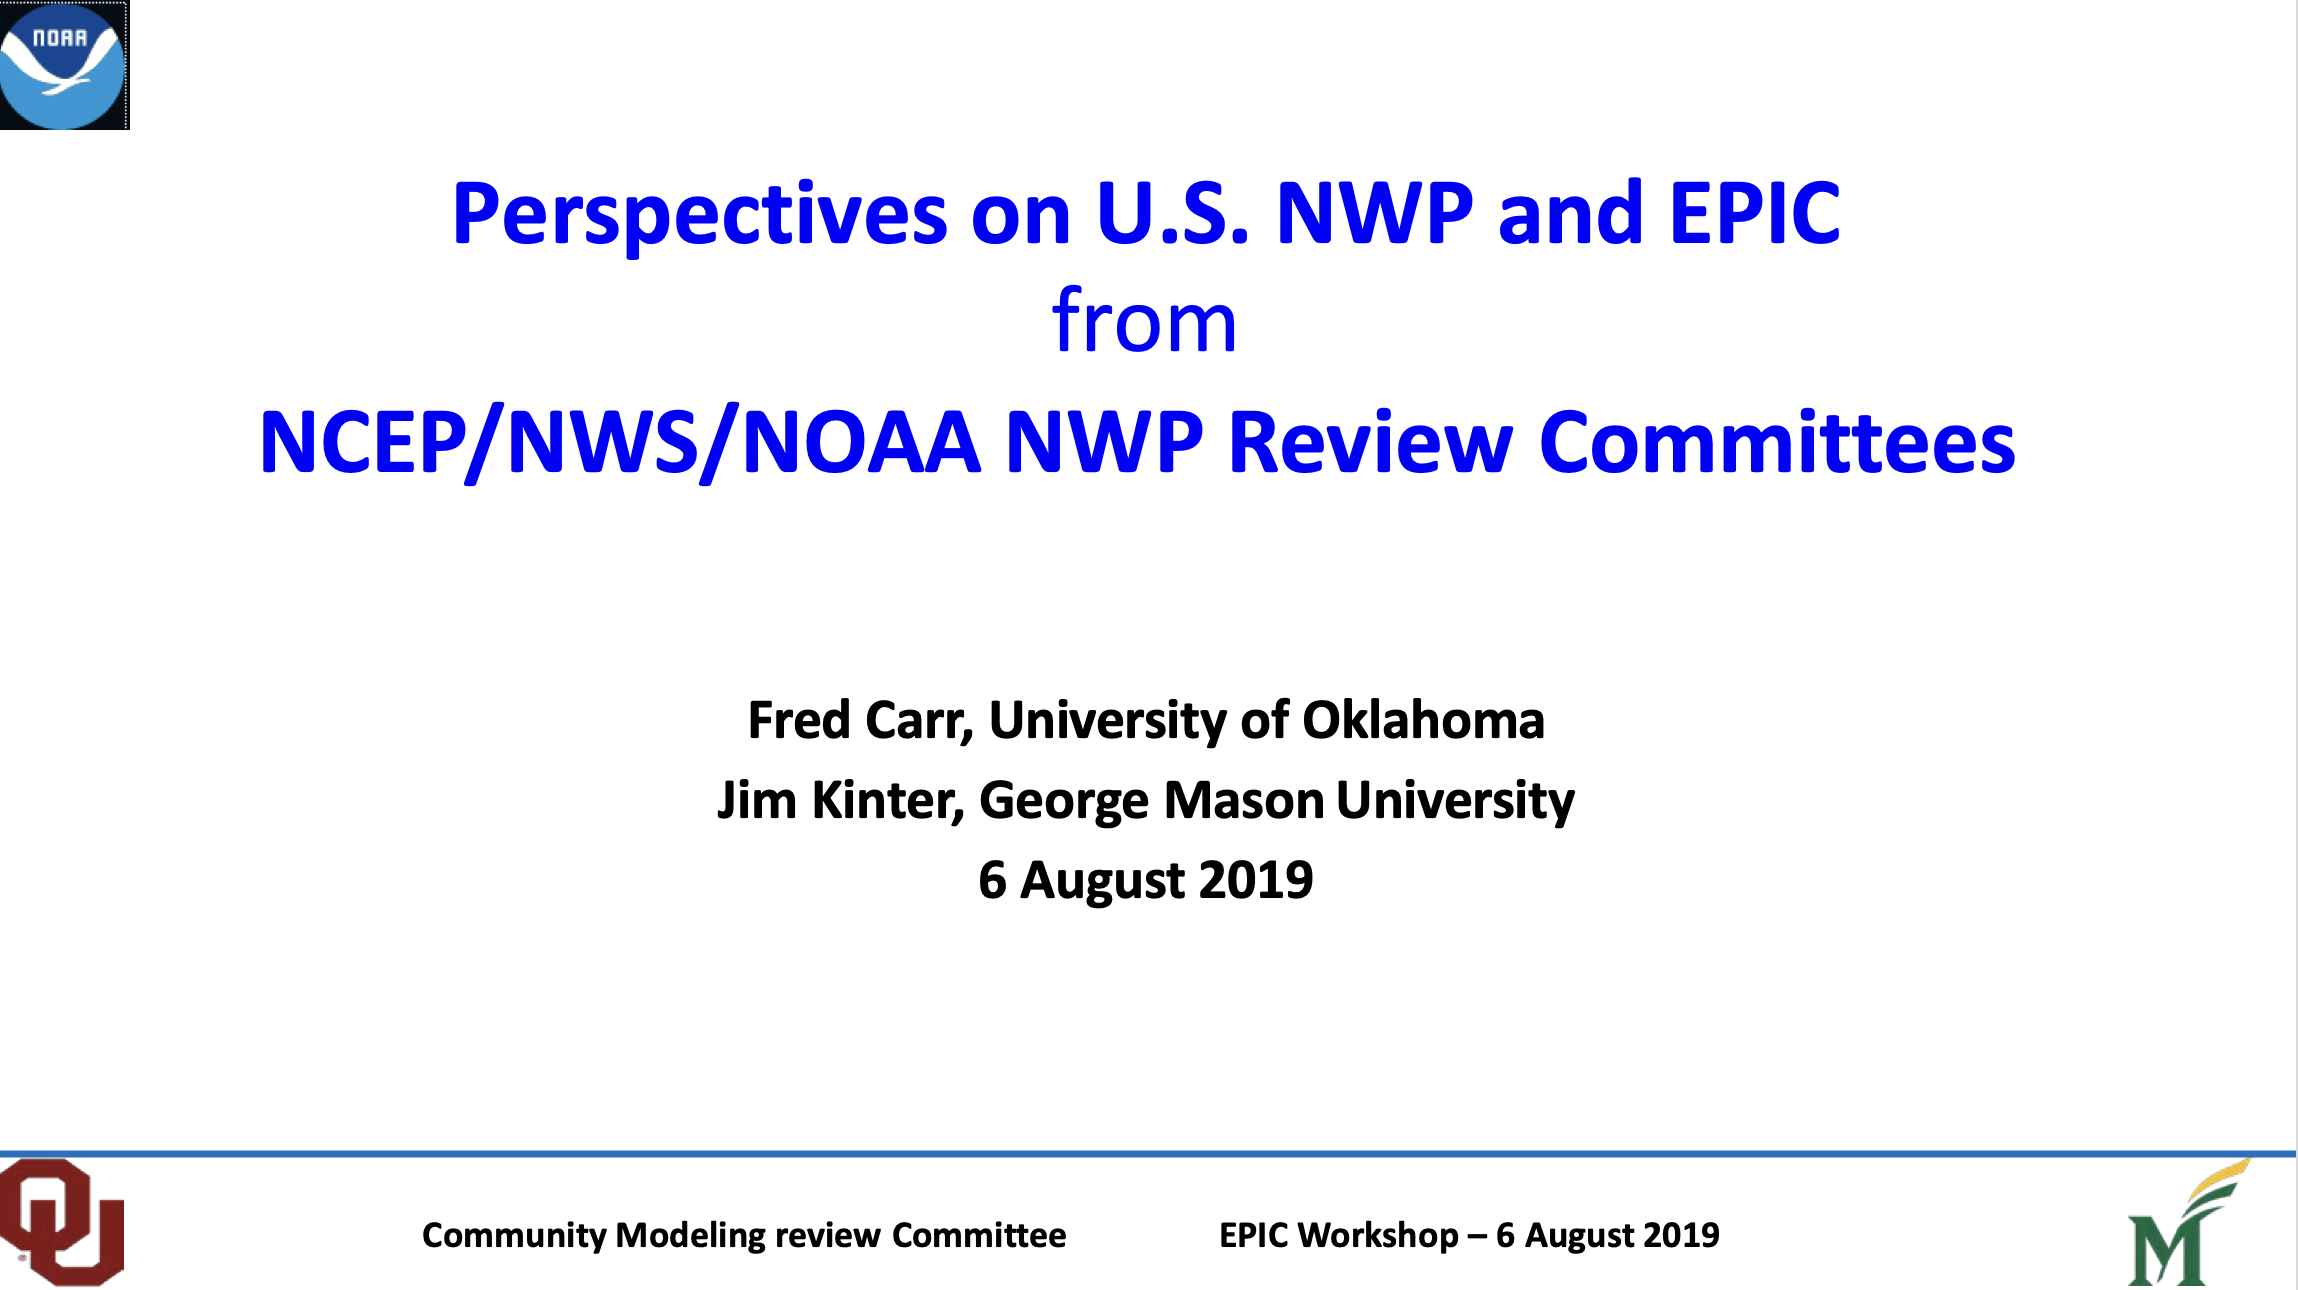 Perspectives on U.S. NWP and EPIC from NCEP/NWS/NOAA NWP Review Committees